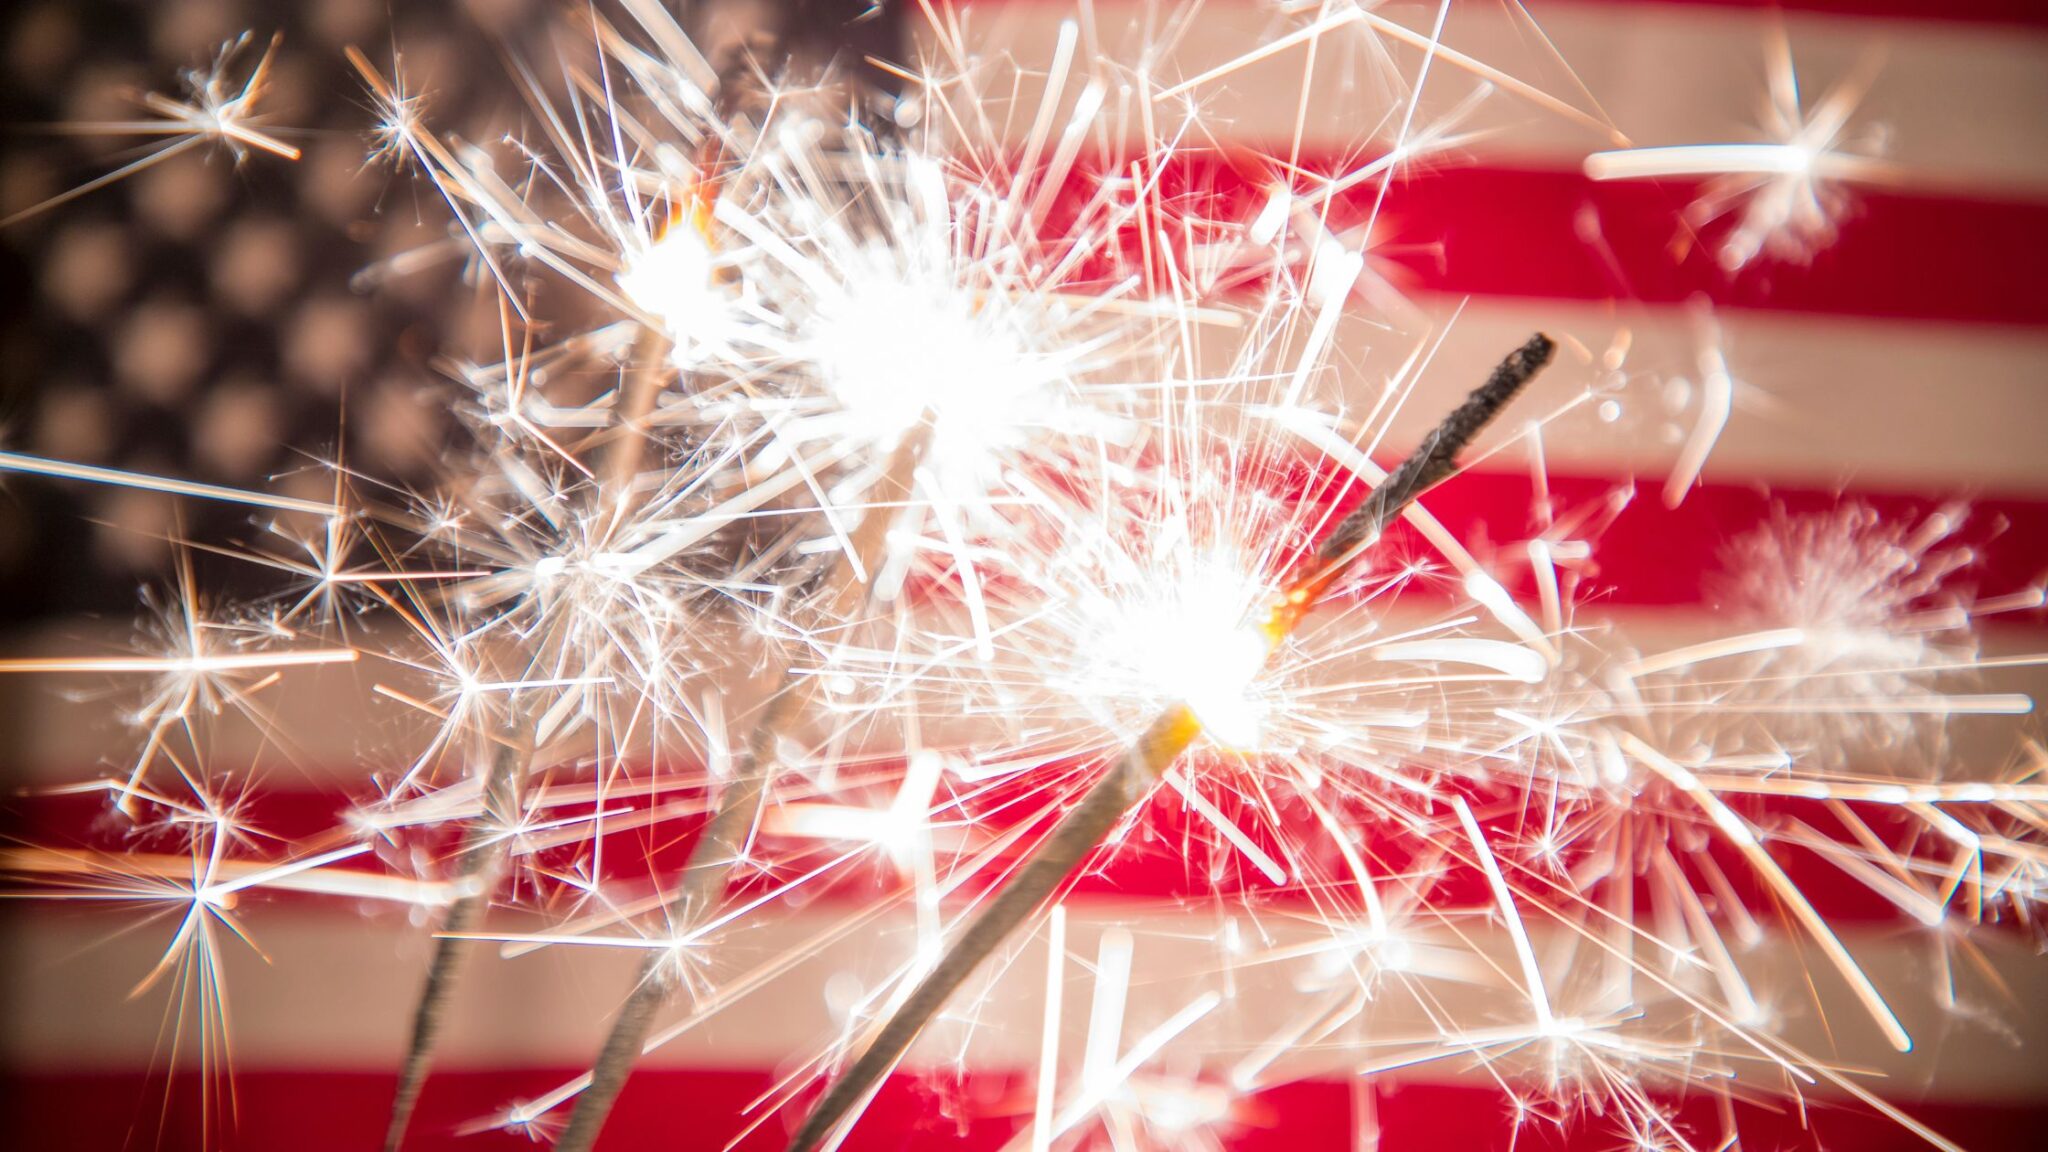 Read more about the article Fun 4th of July Activities for Teens and Families to Do Together